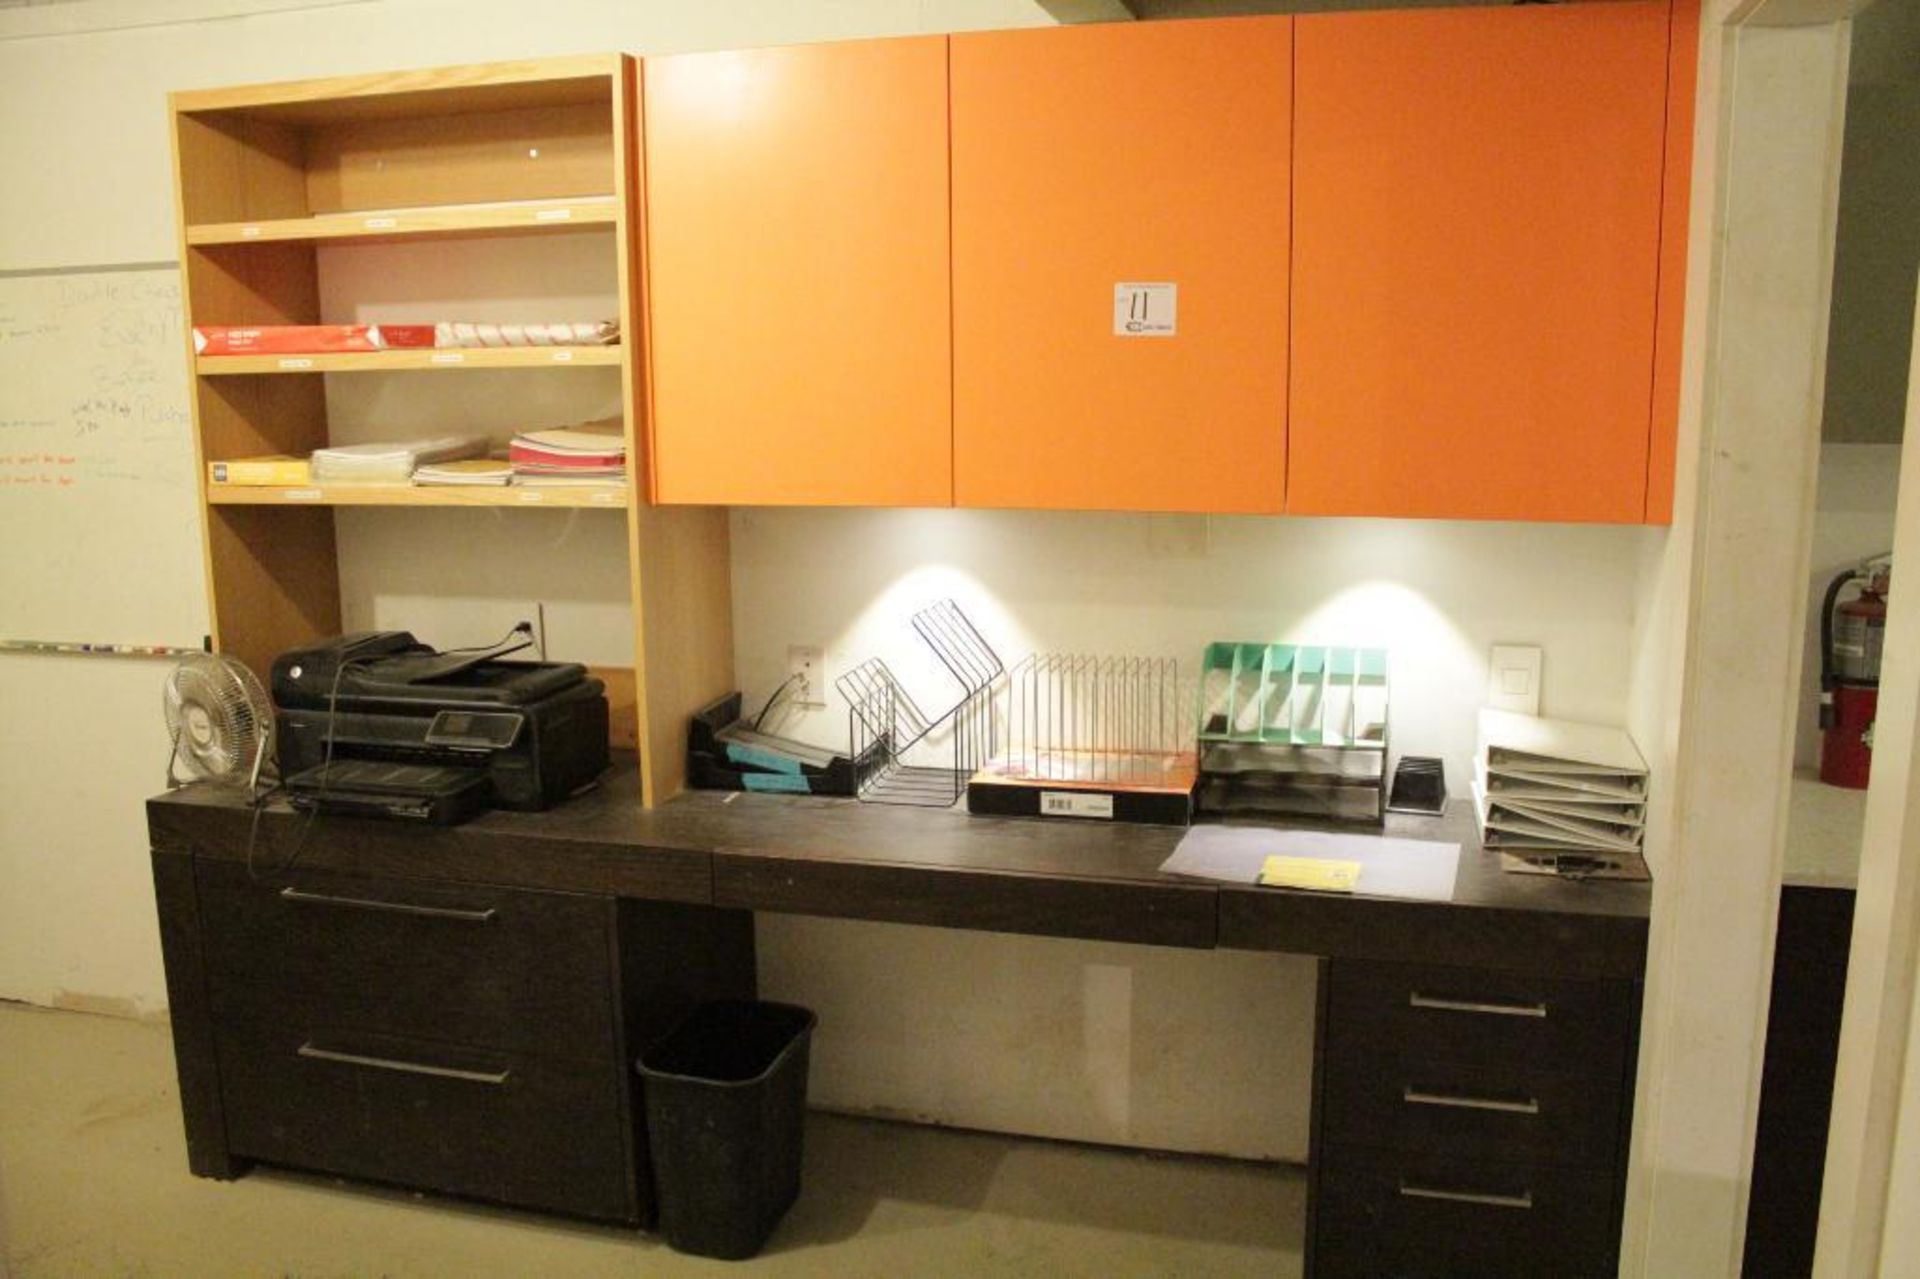 Contents of office, cabinets, printer , monitor - Image 3 of 6